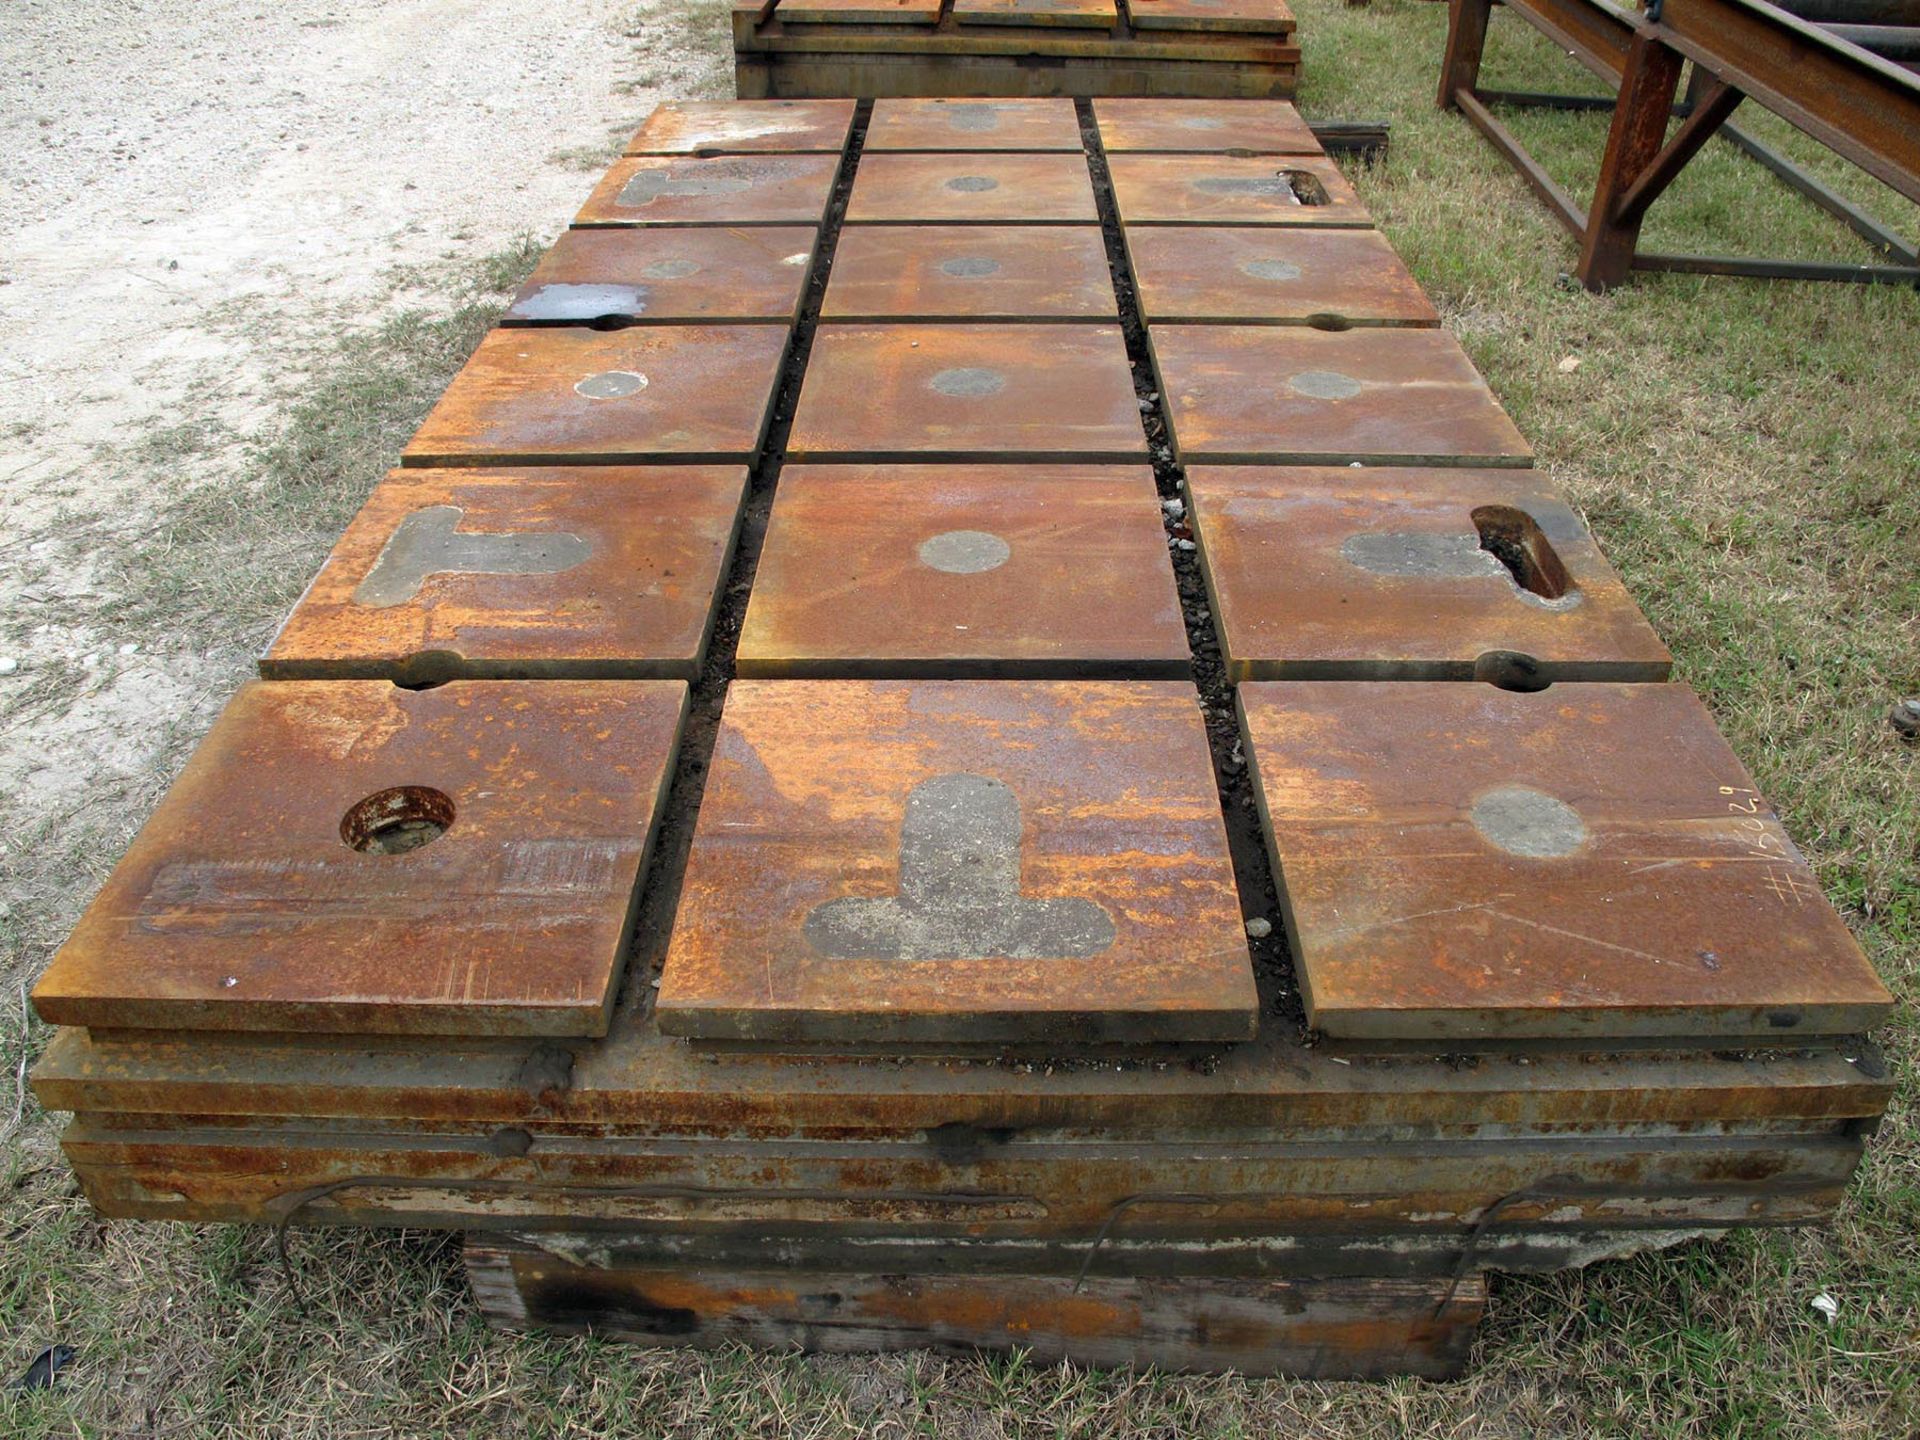 10' X 6â€™ T-SLOTTED FLOOR TABLE, 118-1/2" x 58-1/2" x 10" ht., (2) long. T-slots on 20" centers, (